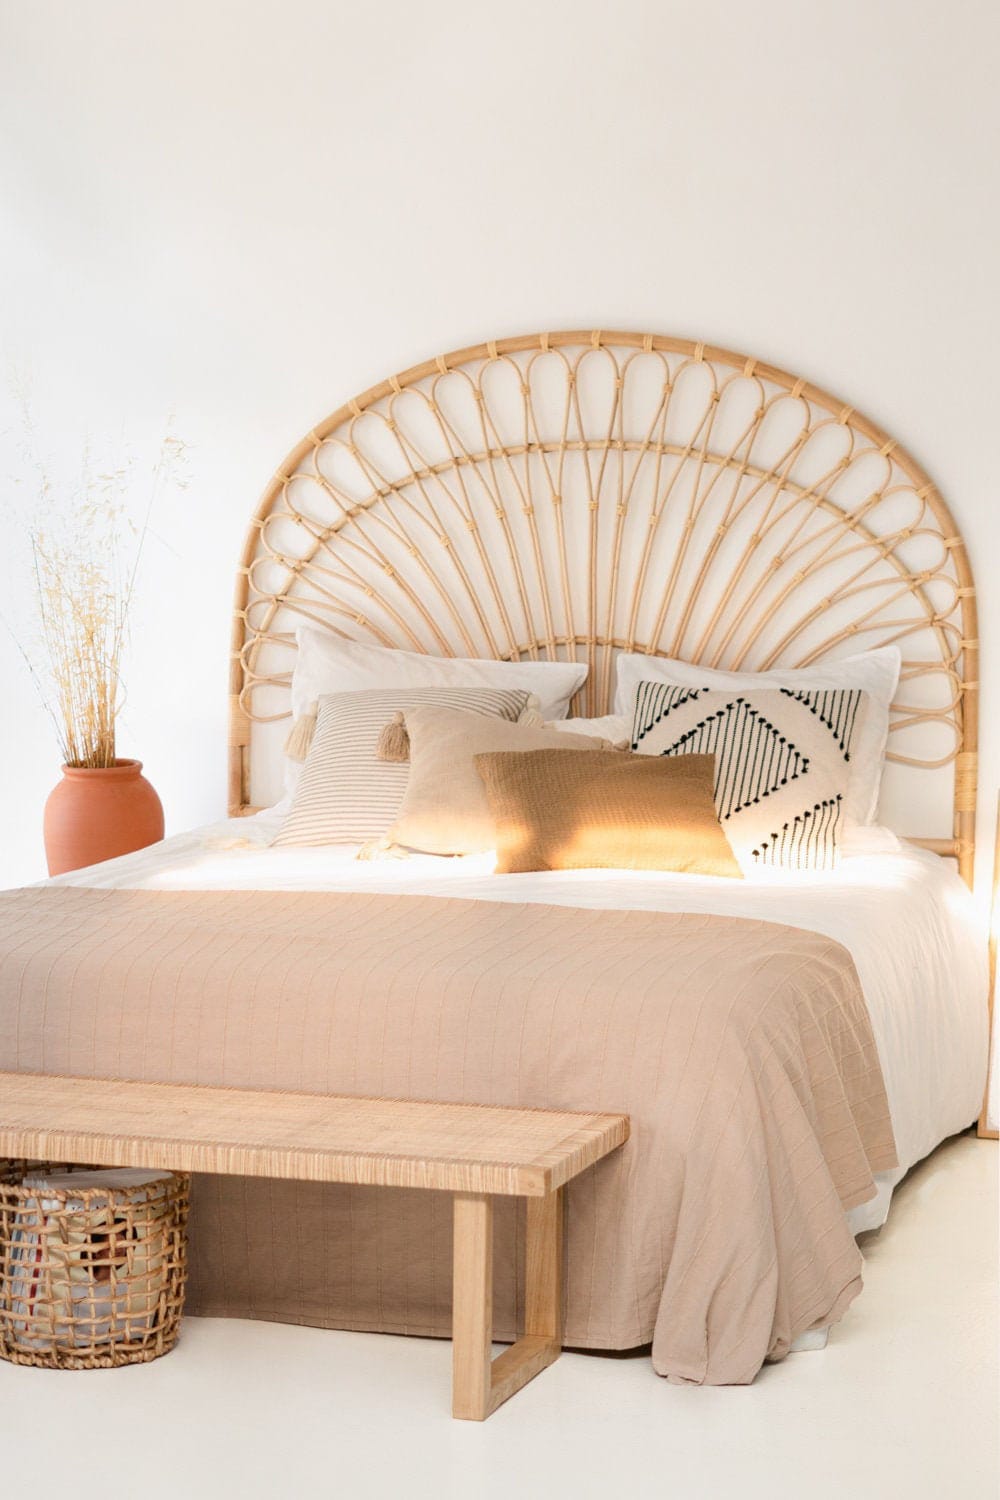 "This cane wooden headboard adds character and warmth to your sleeping area."